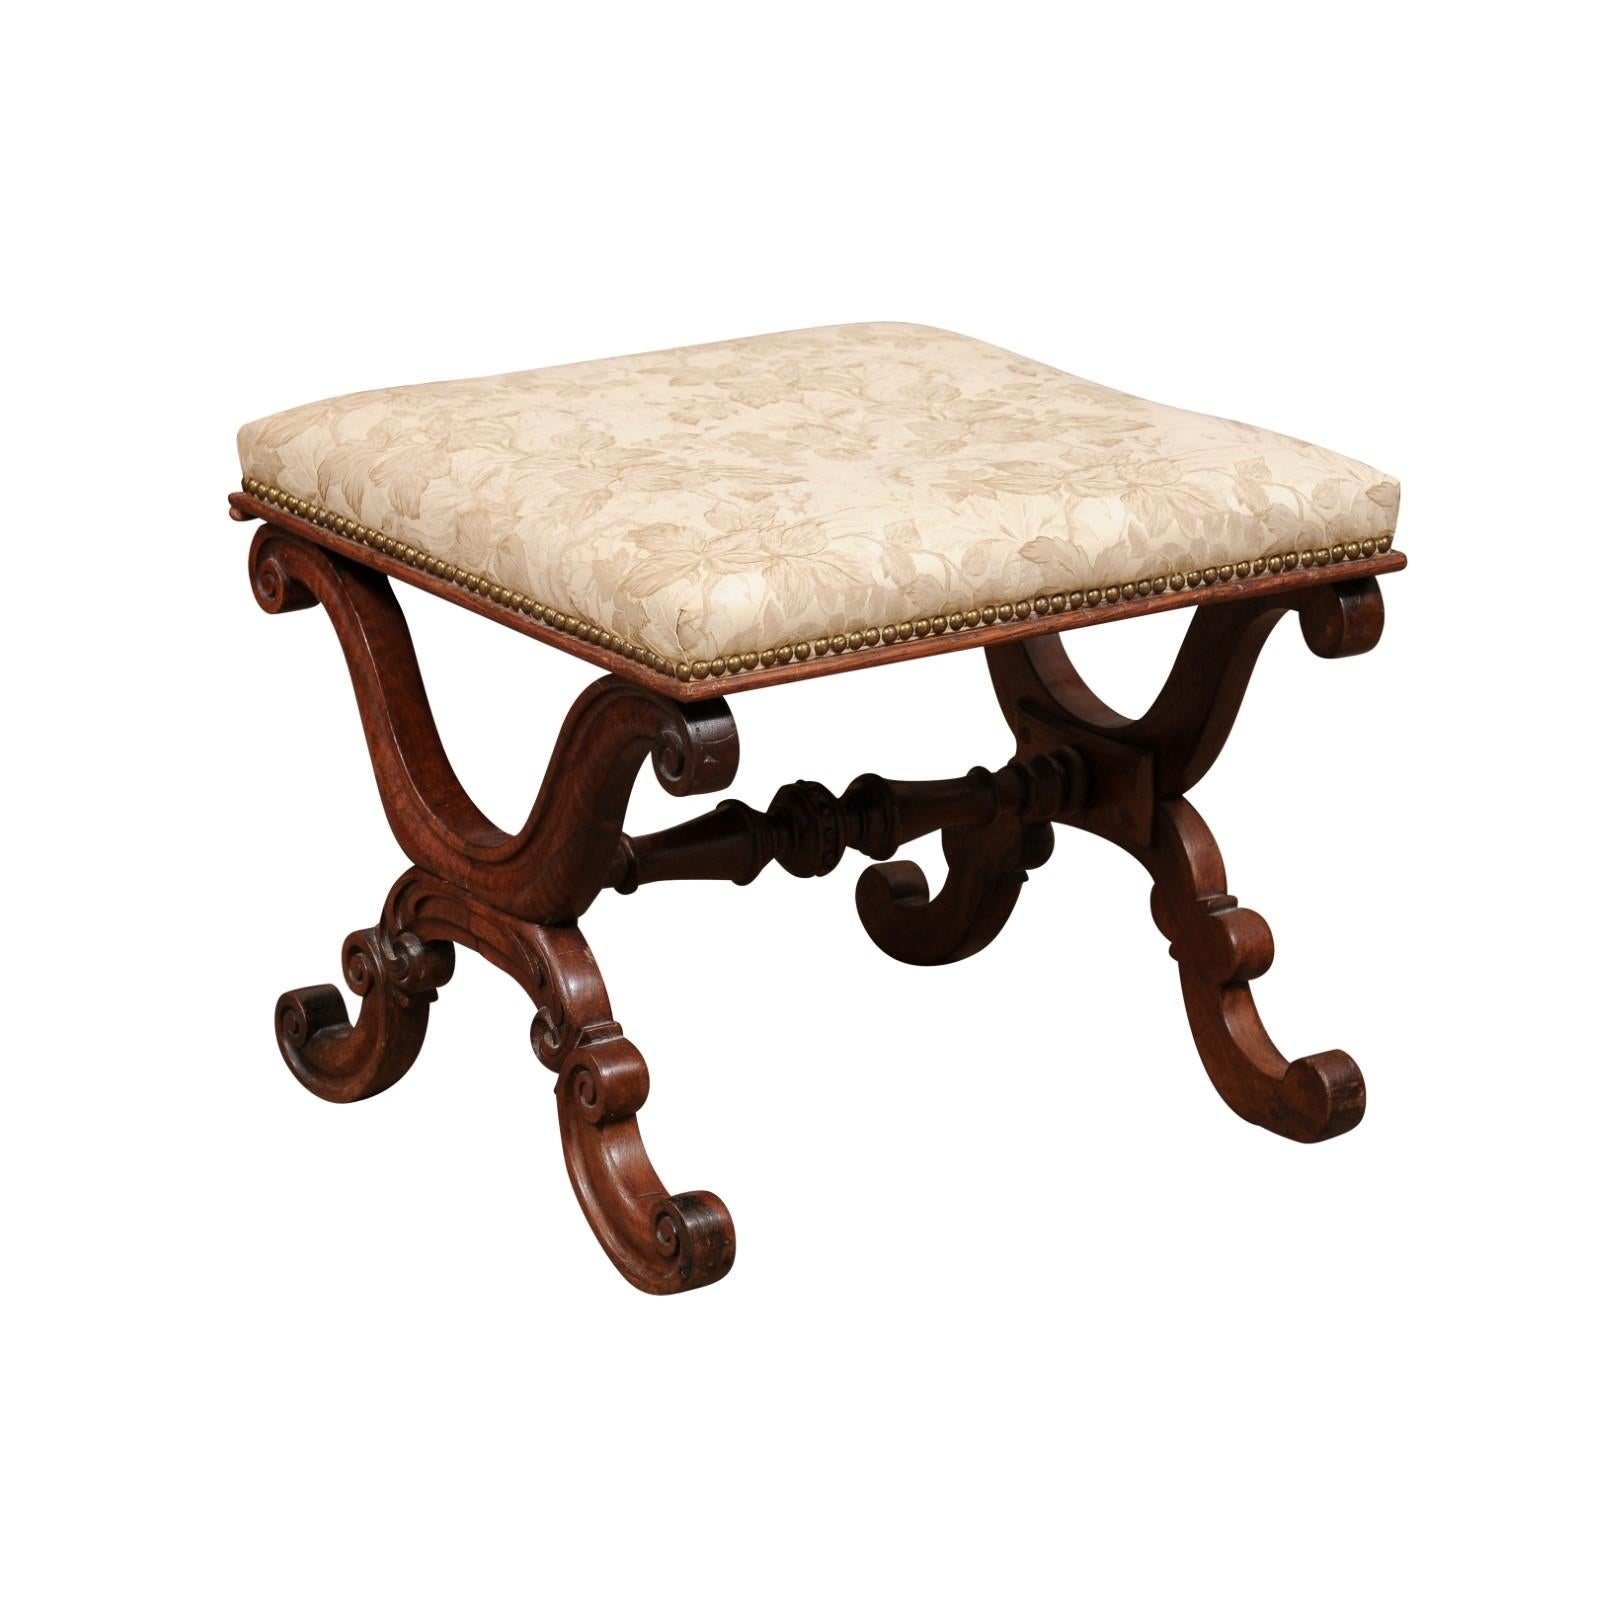 English William IV Mahogany X Form Bench with Upholstered Seat, ca. 1830 In Good Condition For Sale In Atlanta, GA